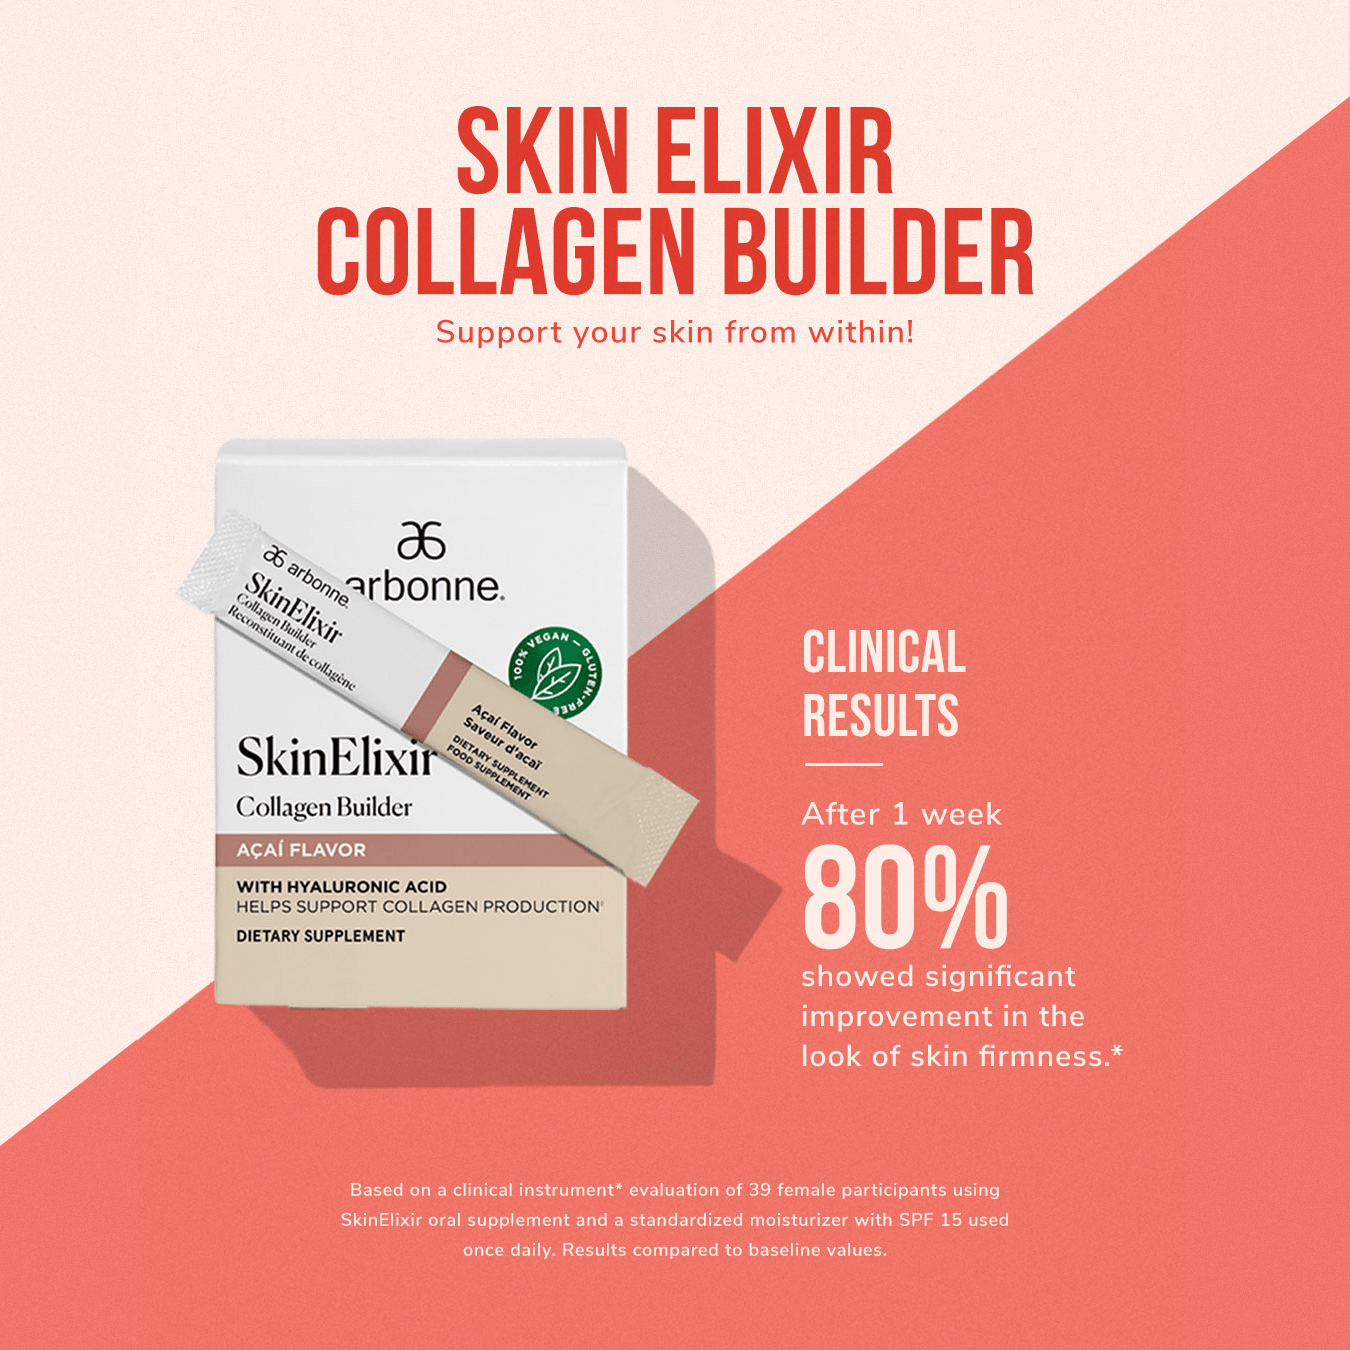 Arbonne Skin Elixir Collagen Builder with Acai flavor box and sachet on a peach and red background highlighting clinical results of 80% improvement in skin firmness.